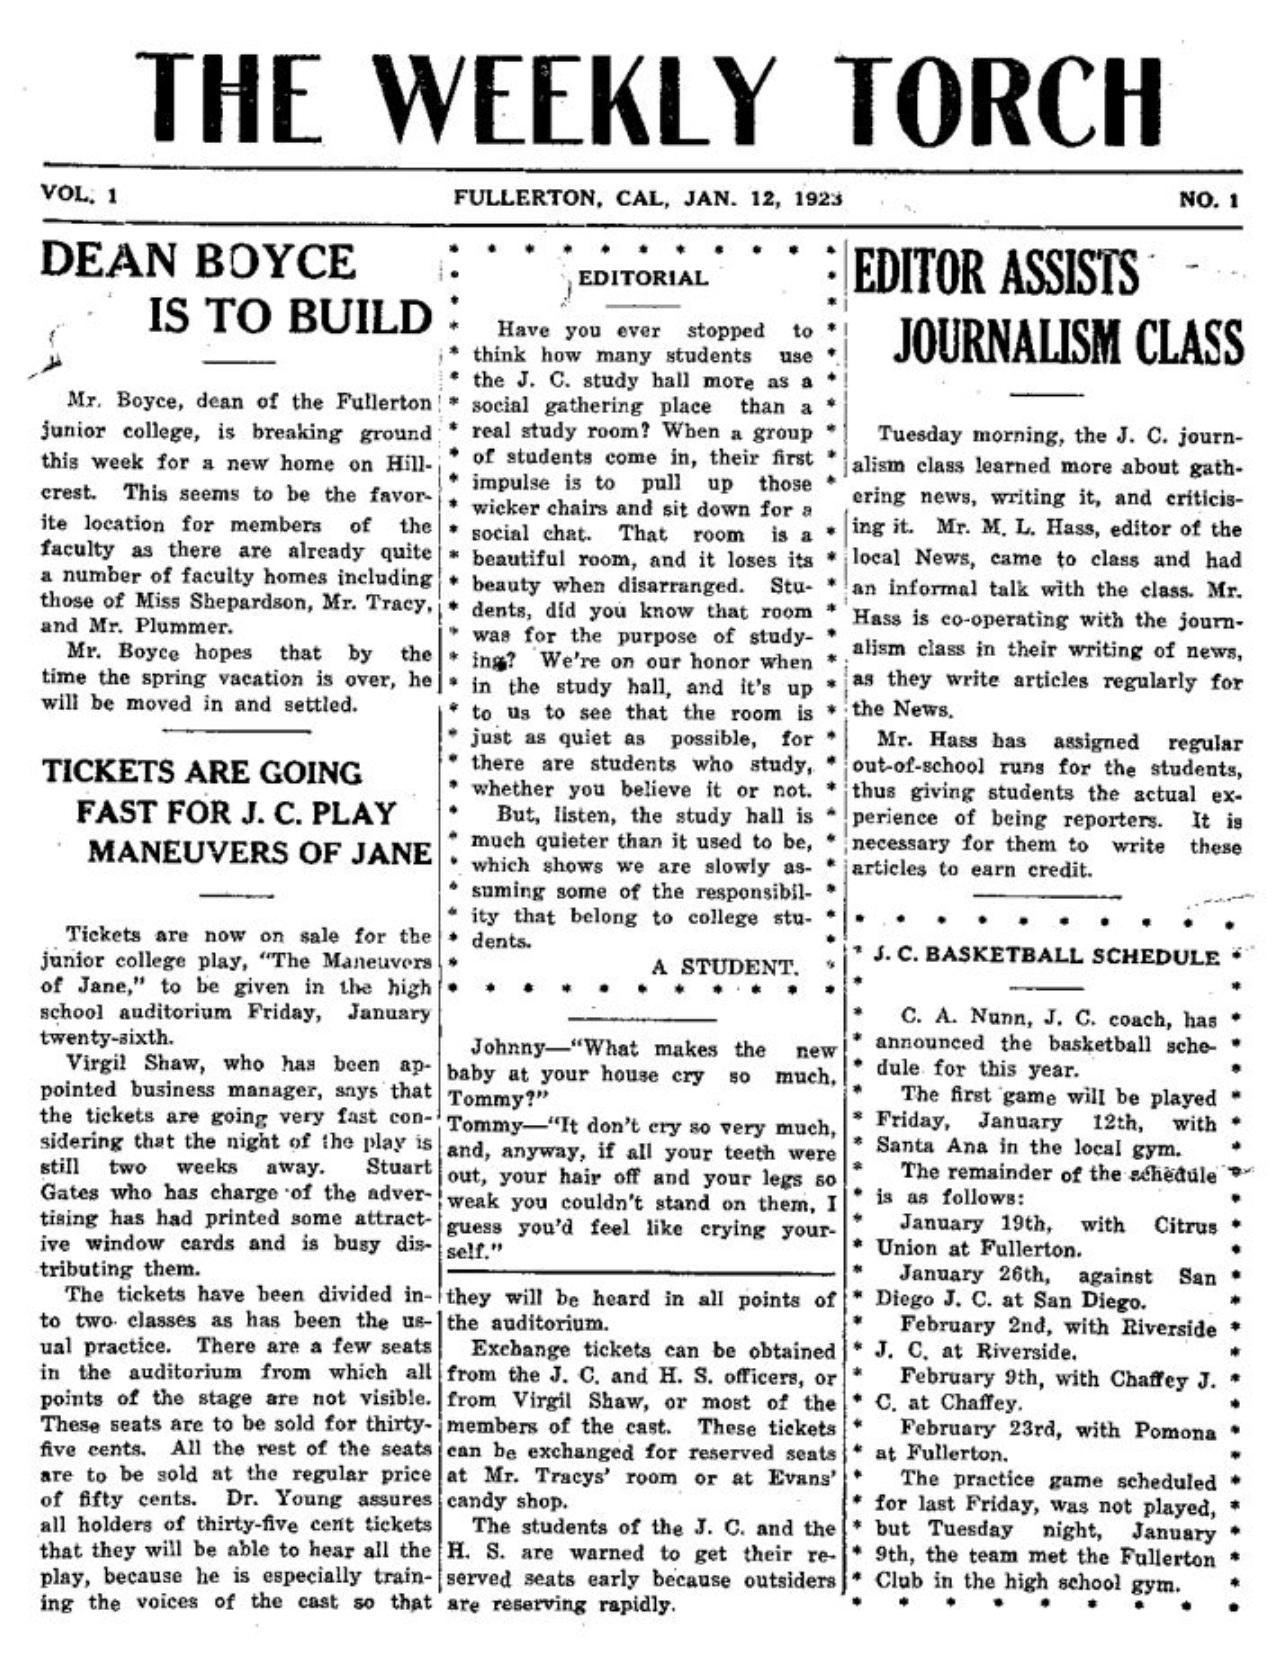 The first issue of The Weekly Torch, the original title of Fullerton Colleges student newspaper, was published on Jan. 12, 1923.